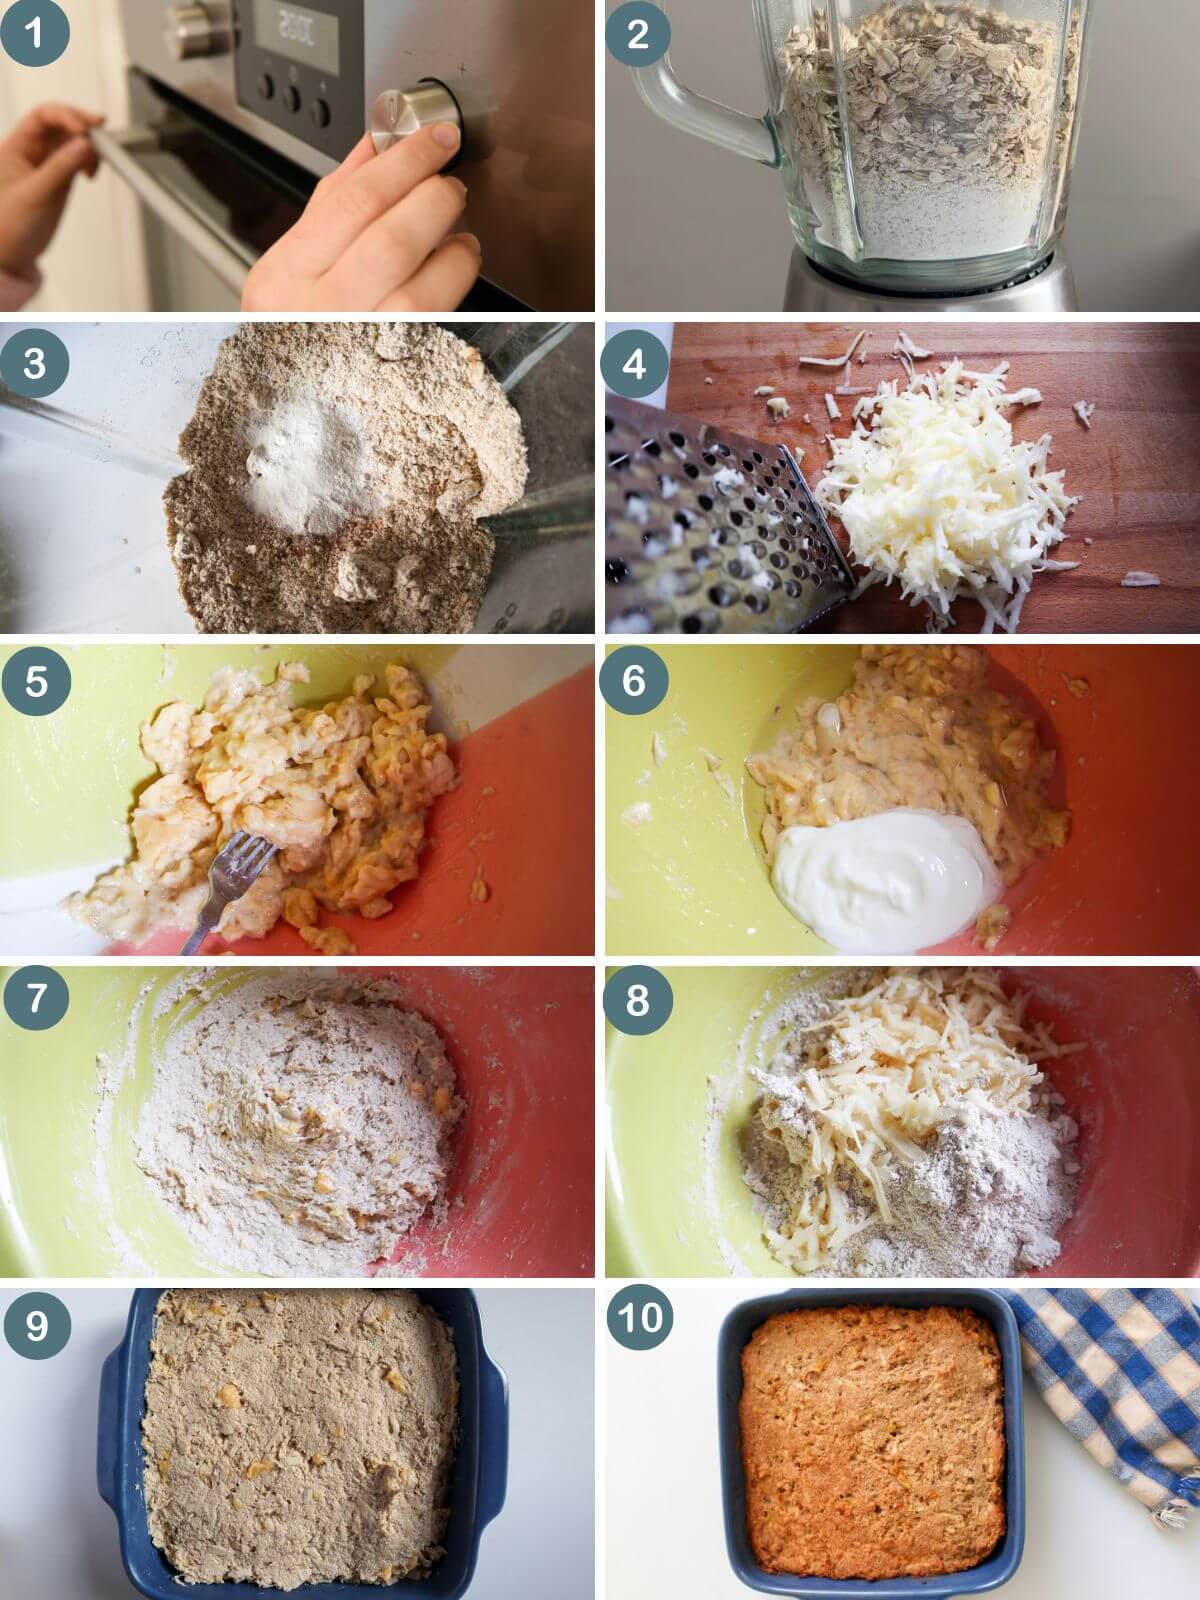 Collage of 10 images showing how to make teh recipe. 